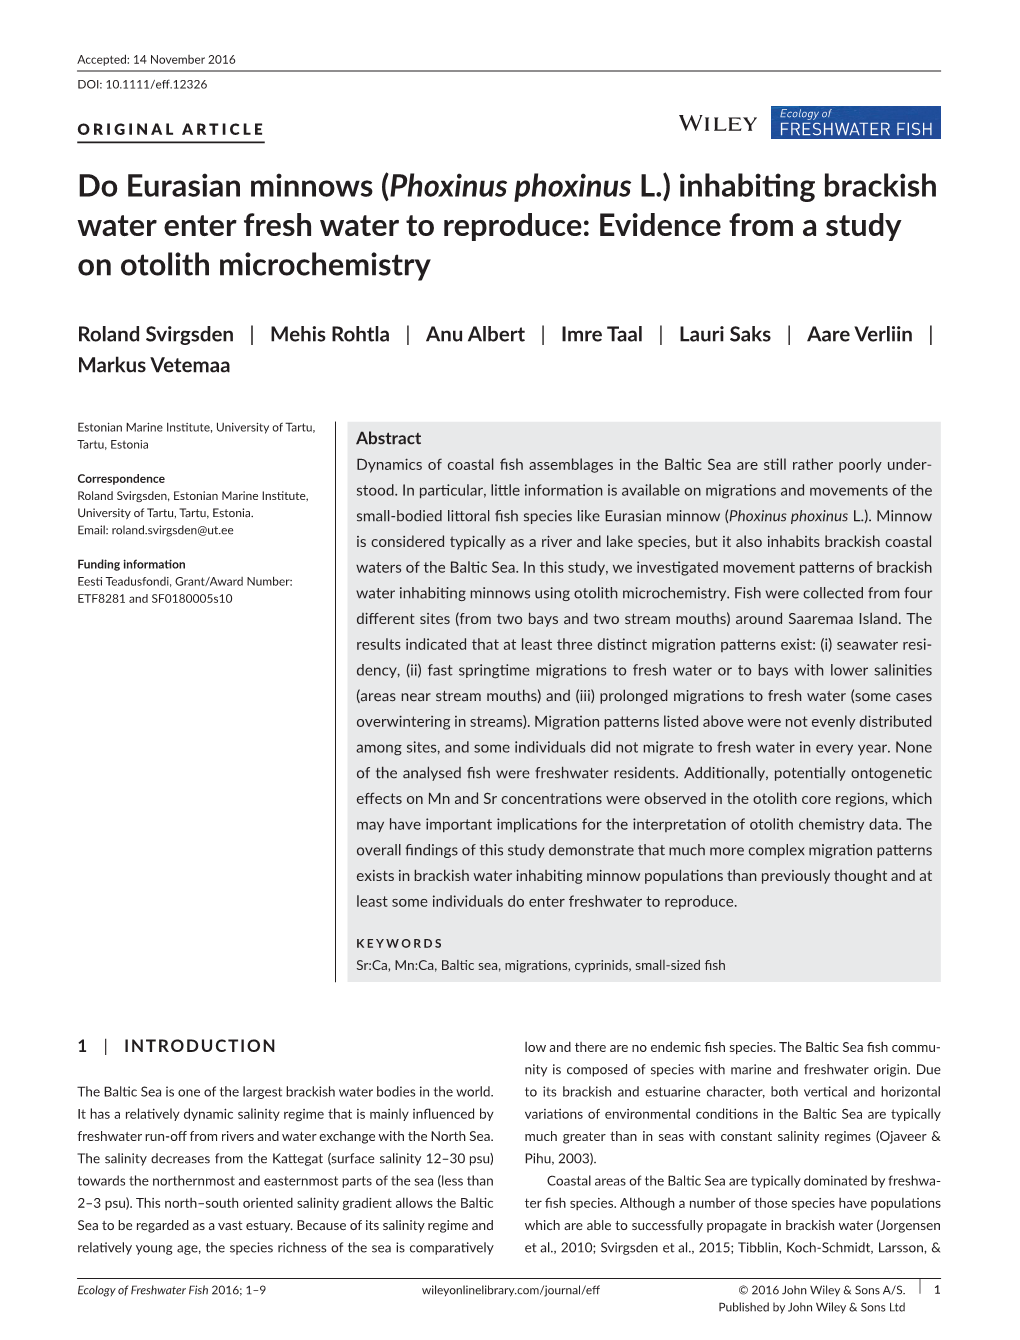 Do Eurasian Minnows (Phoxinus Phoxinus L.) Inhabiting Brackish Water Enter Fresh Water to Reproduce: Evidence from a Study on Otolith Microchemistry